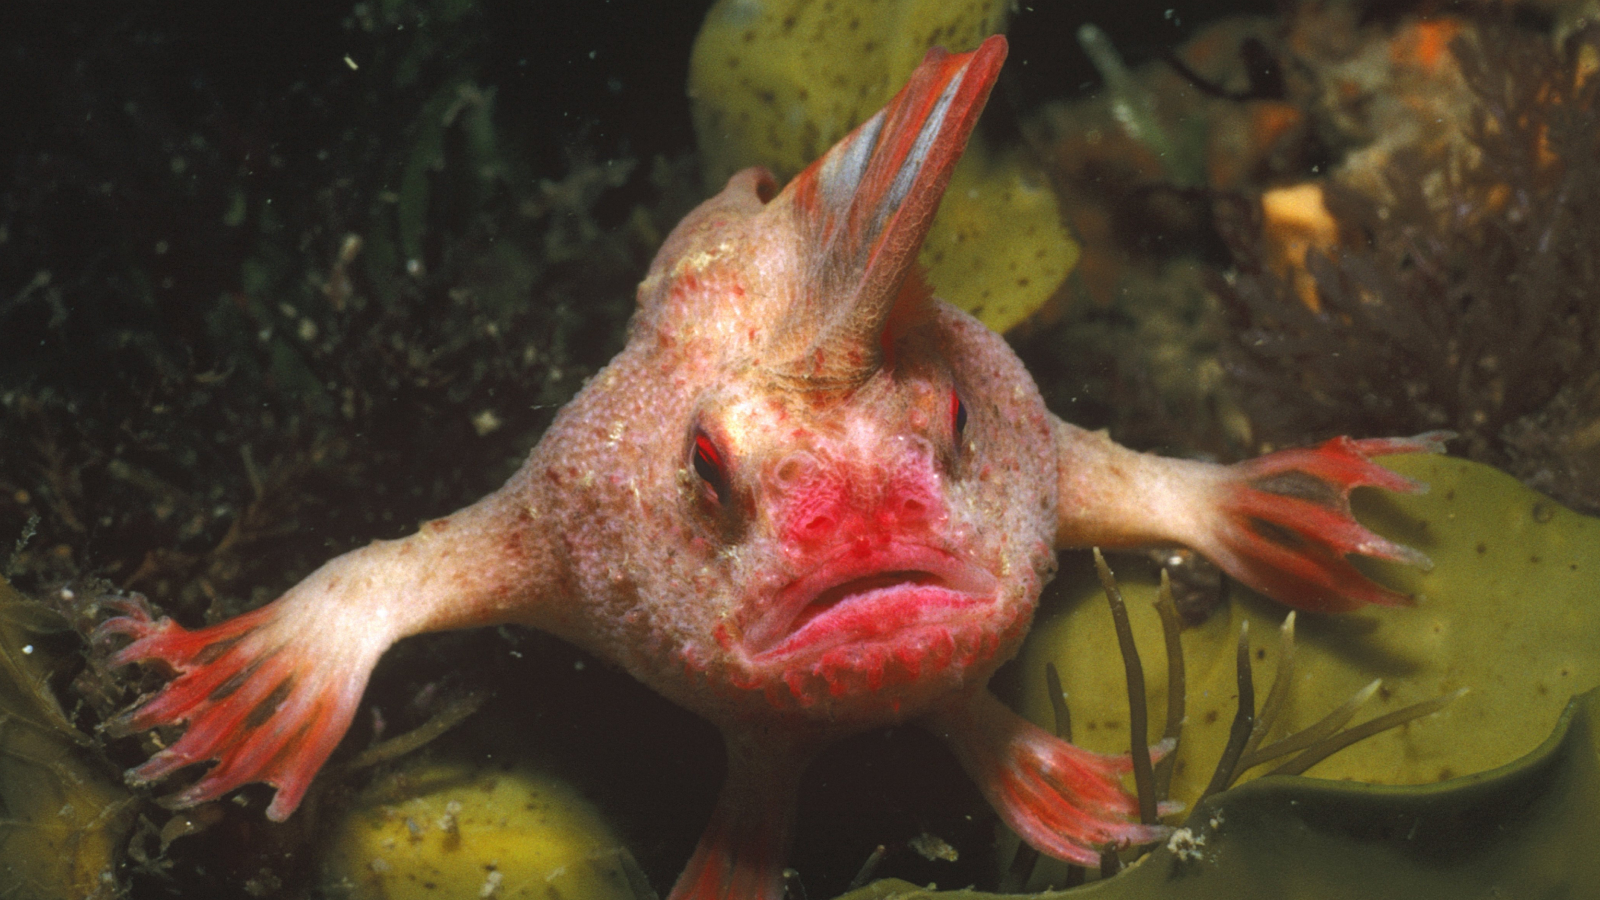  Red handfish: A tiny, moody fish with hands for fins and an extravagant mohawk 